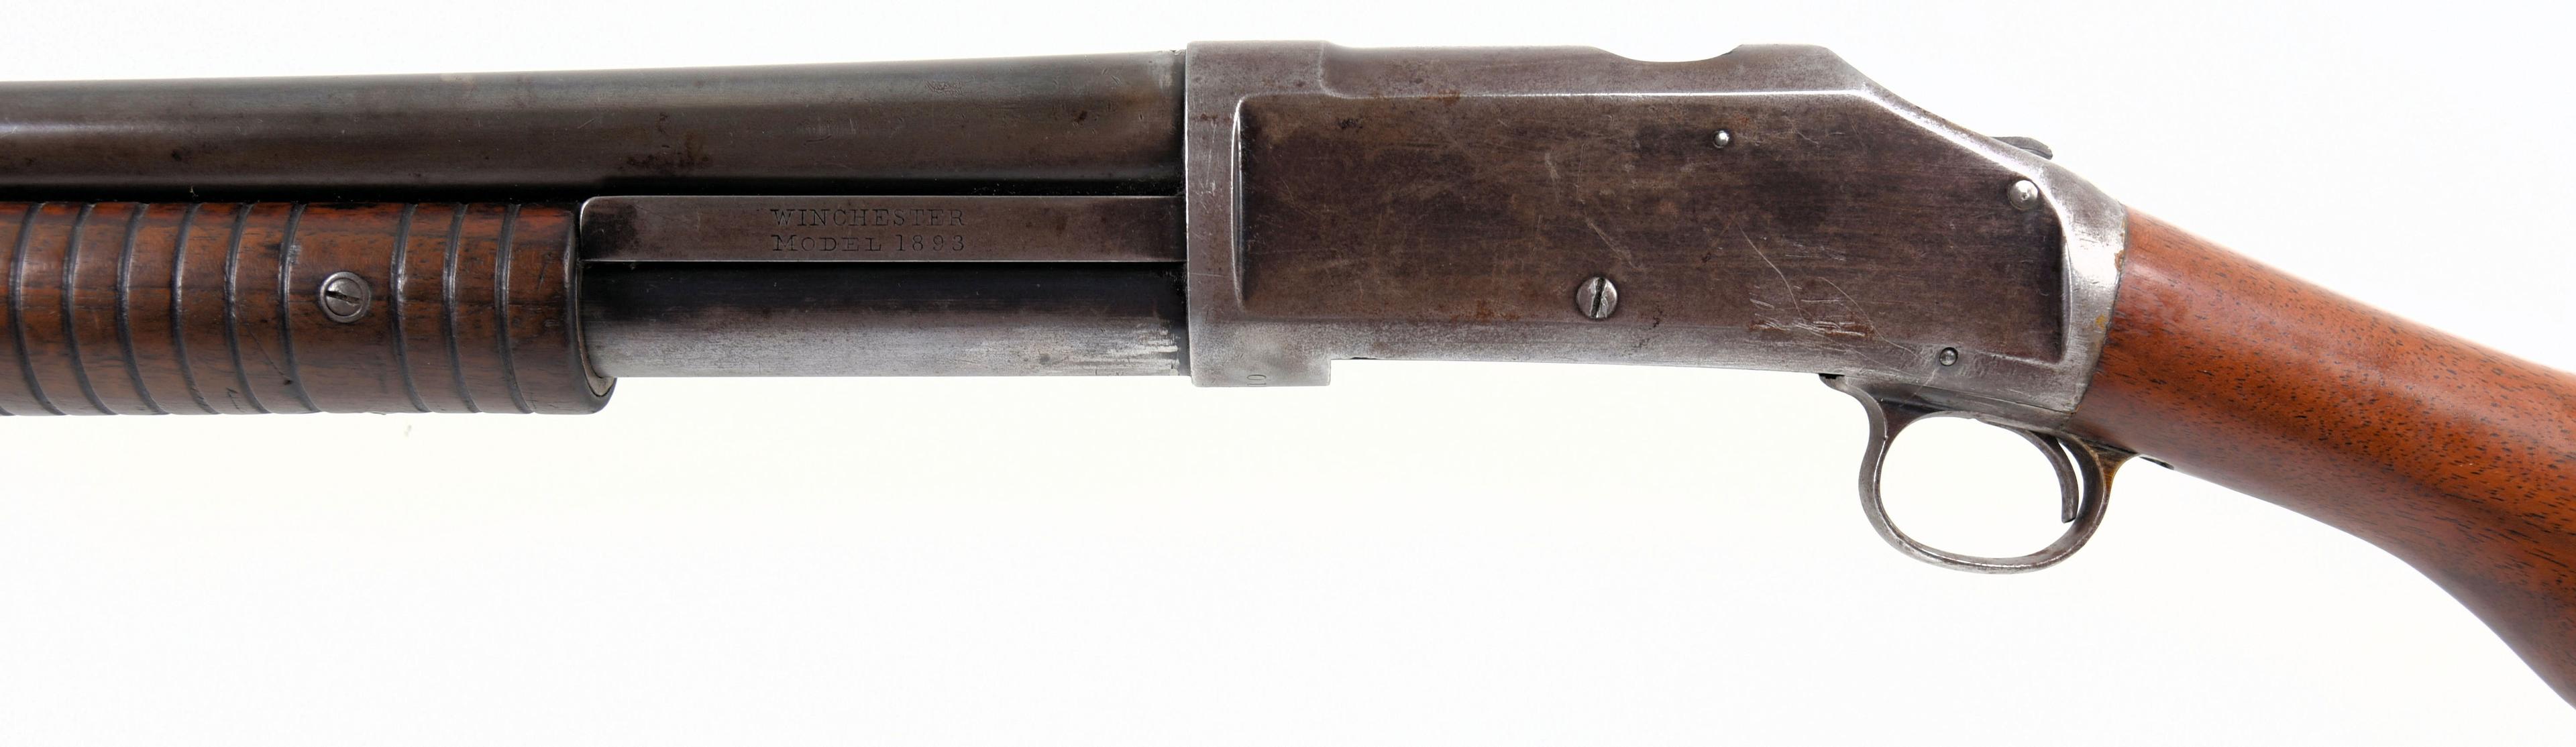 Winchester Repeating Arms Co 1893 Pump Action Shotgun